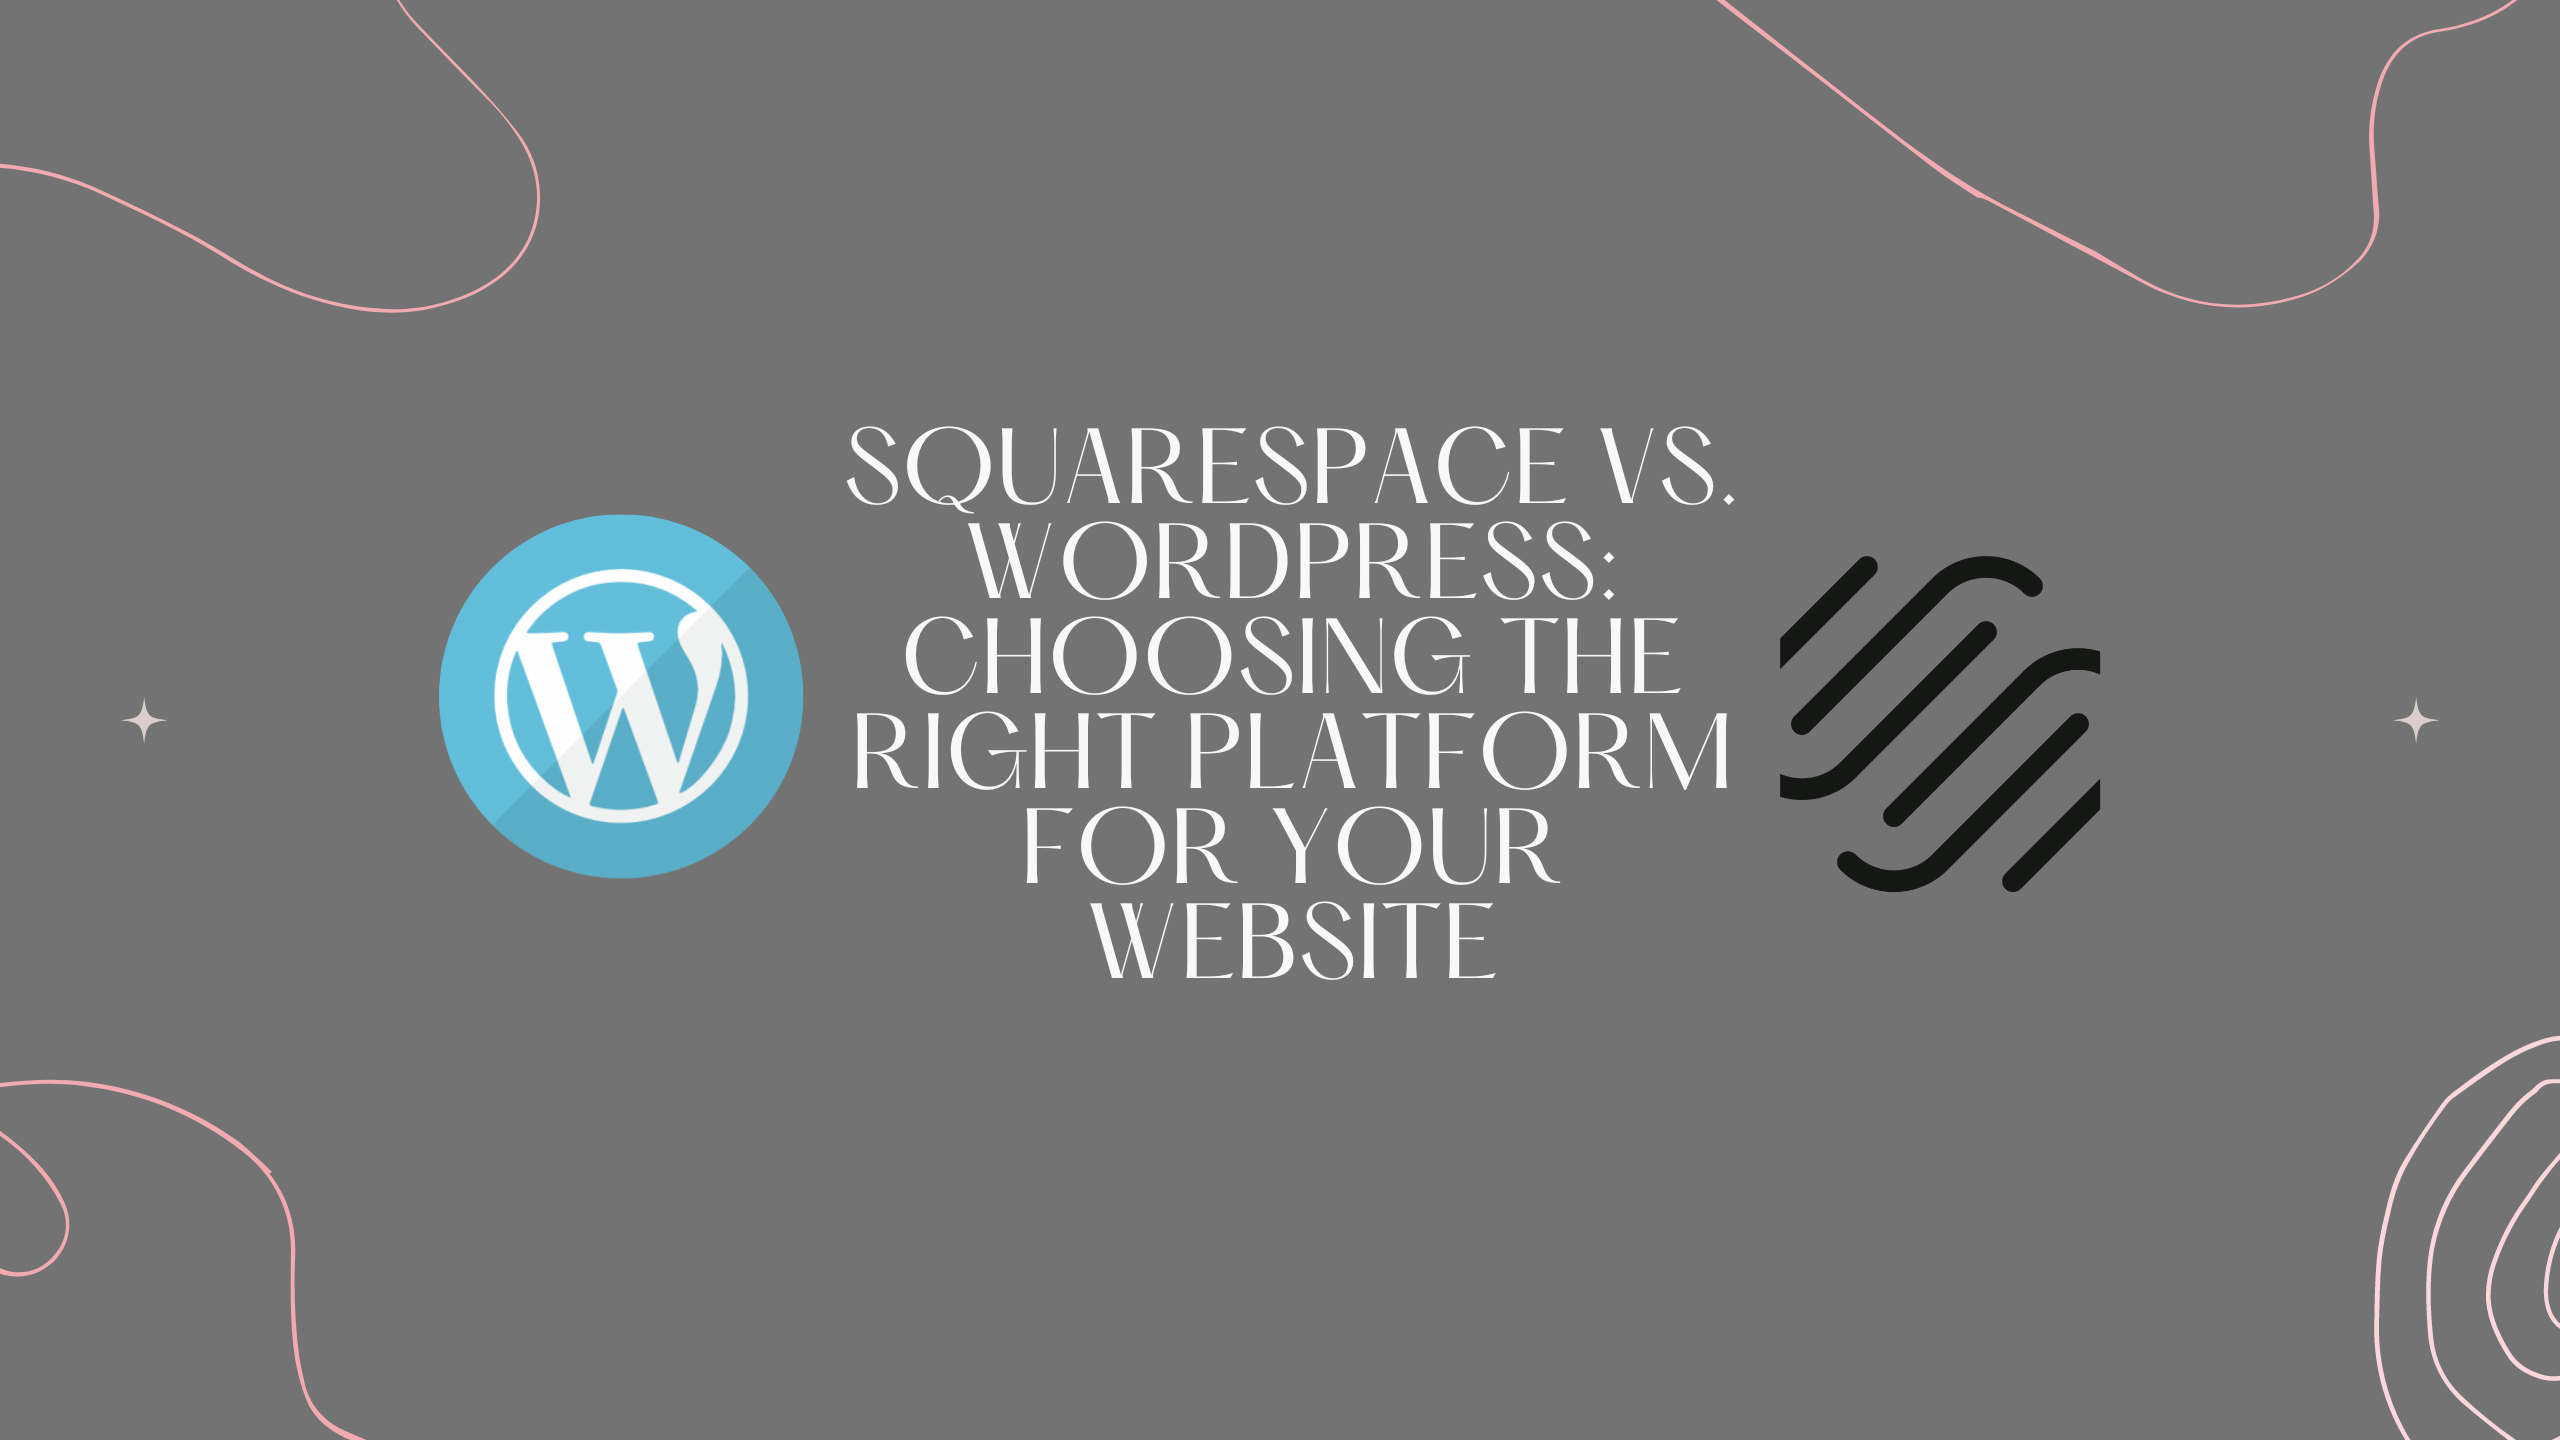 Squarespace vs. WordPress: Choosing the Right Platform for Your Website